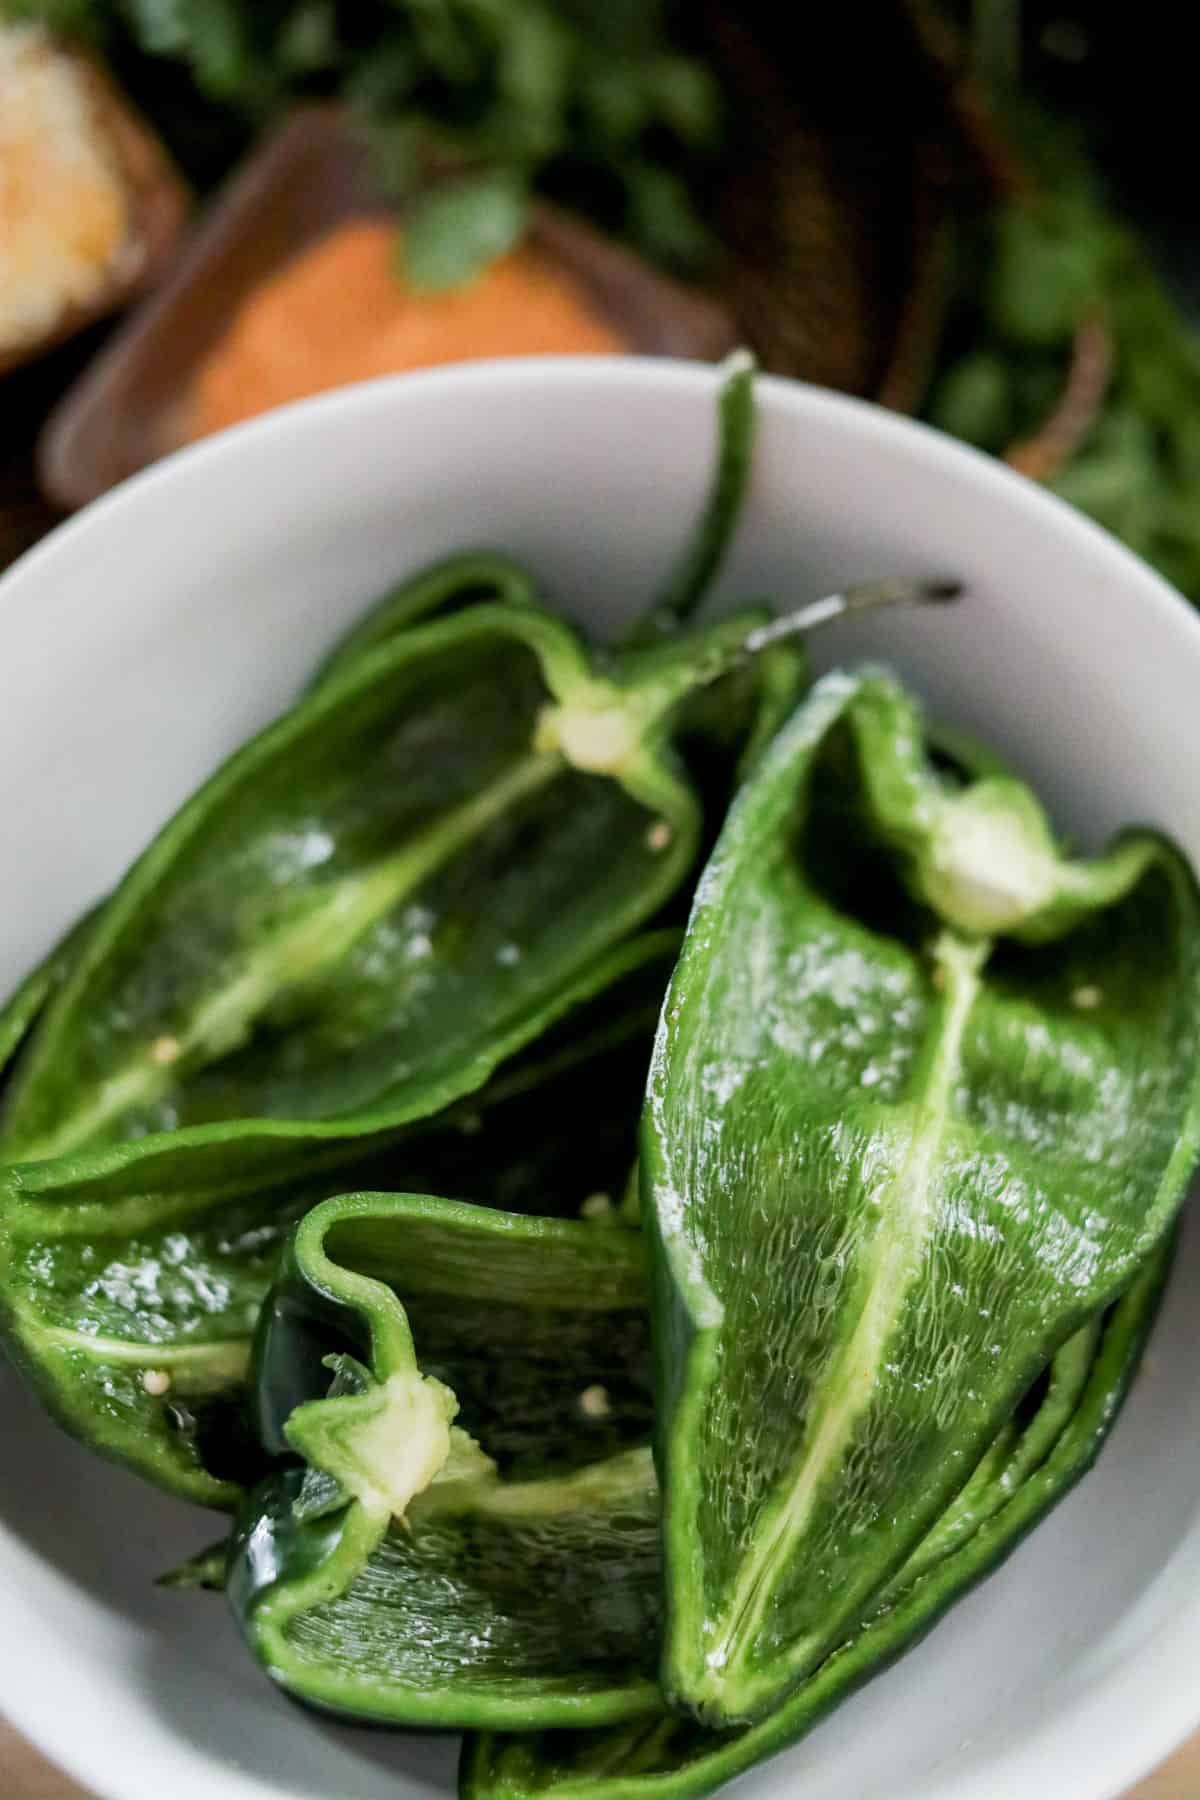 Prepping poblano peppers.